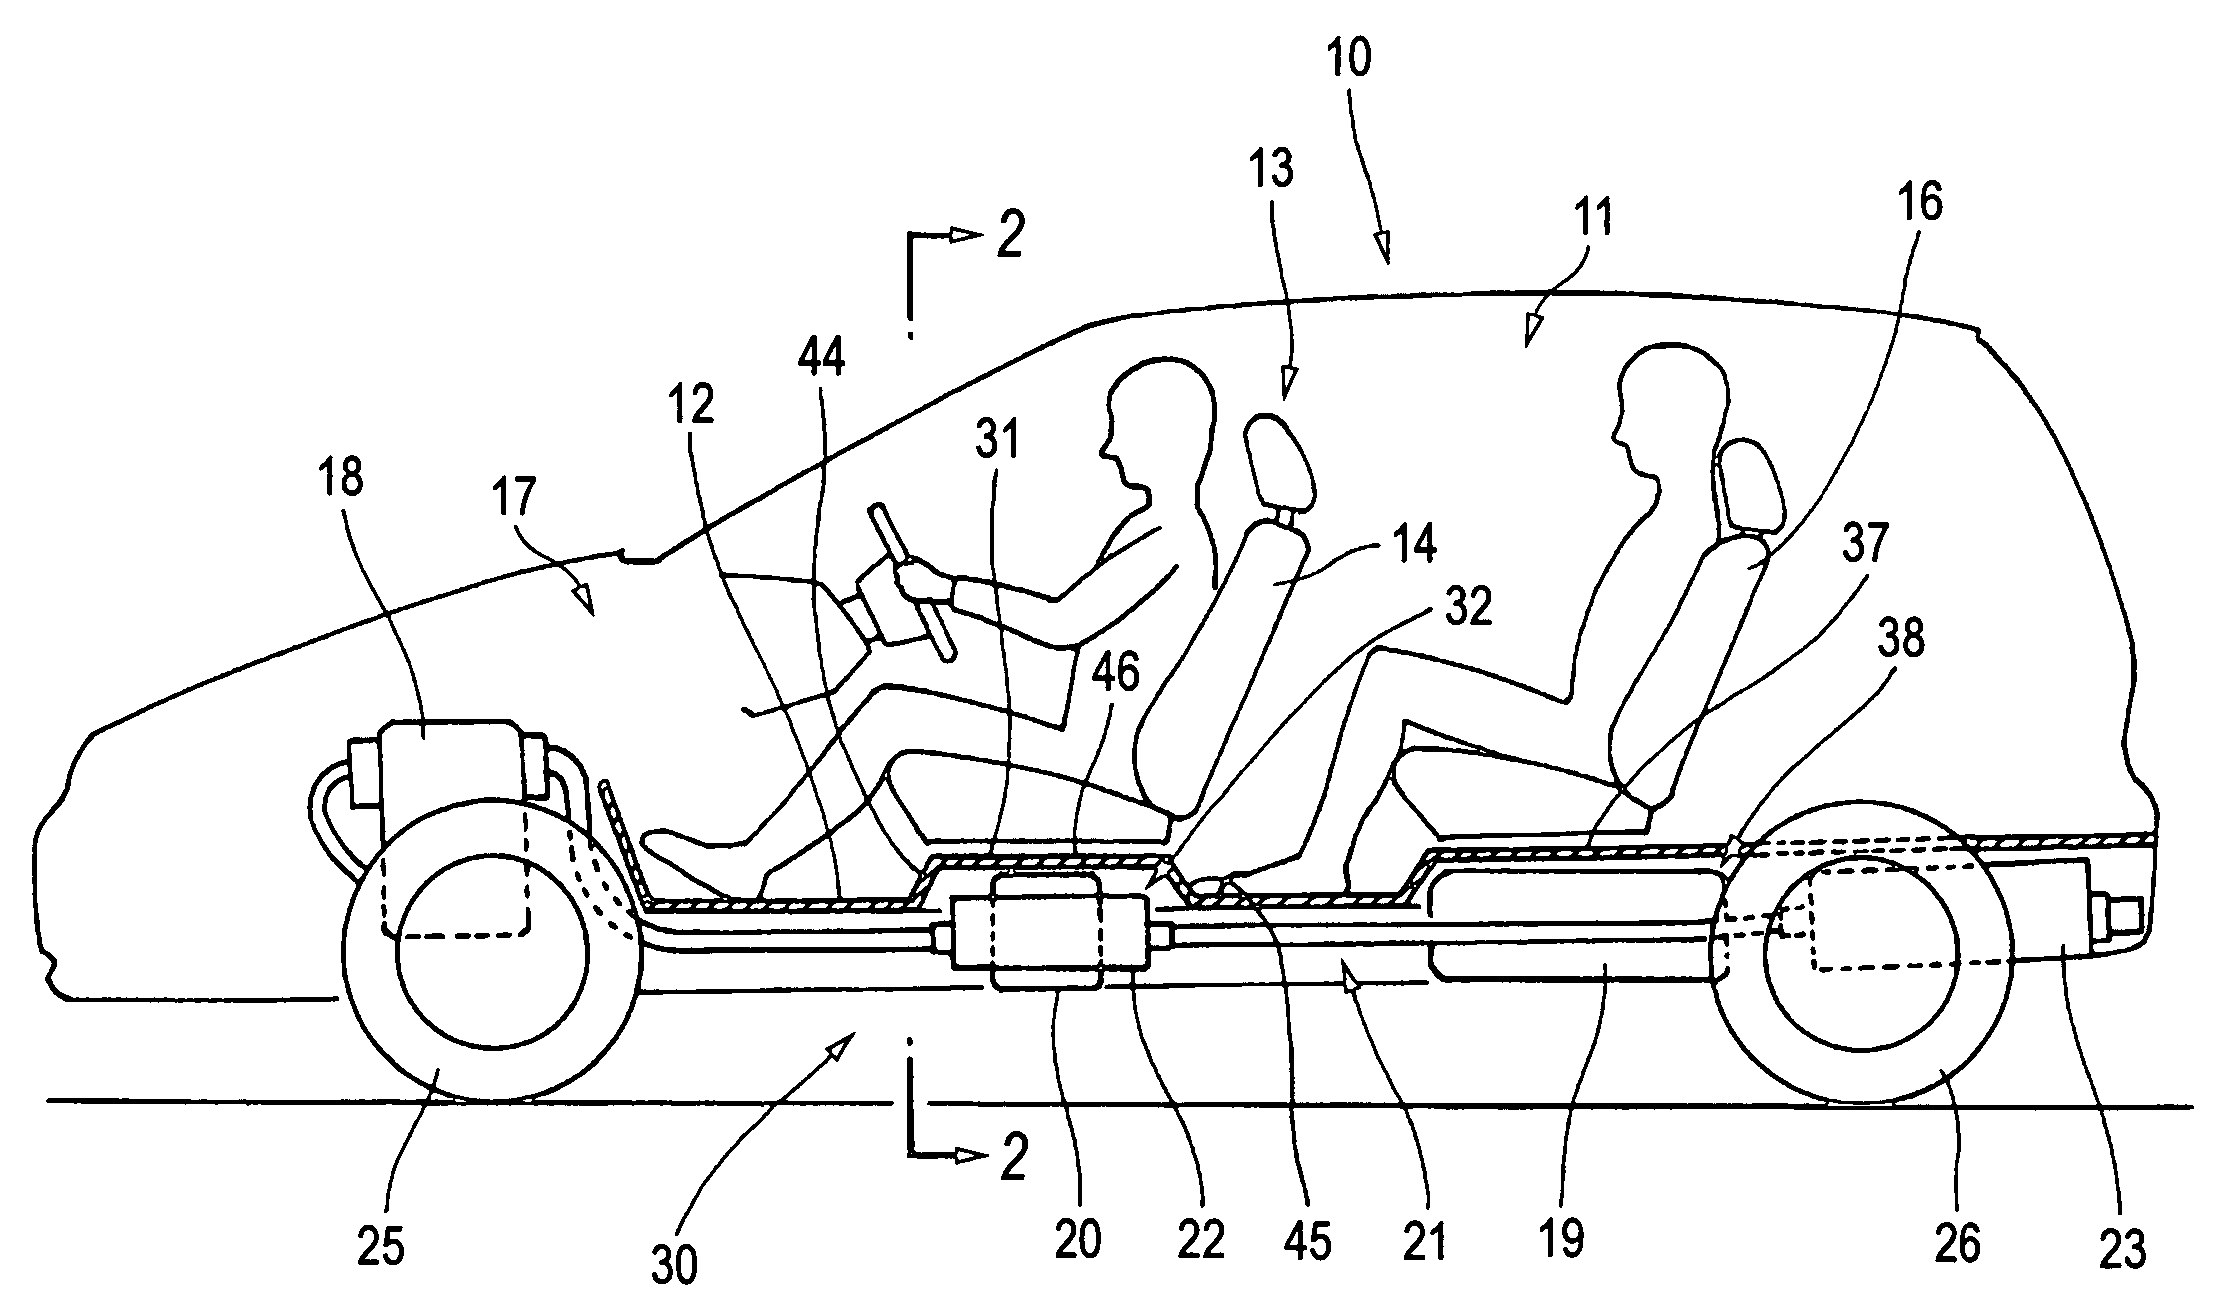 Vehicle canister arranging structure